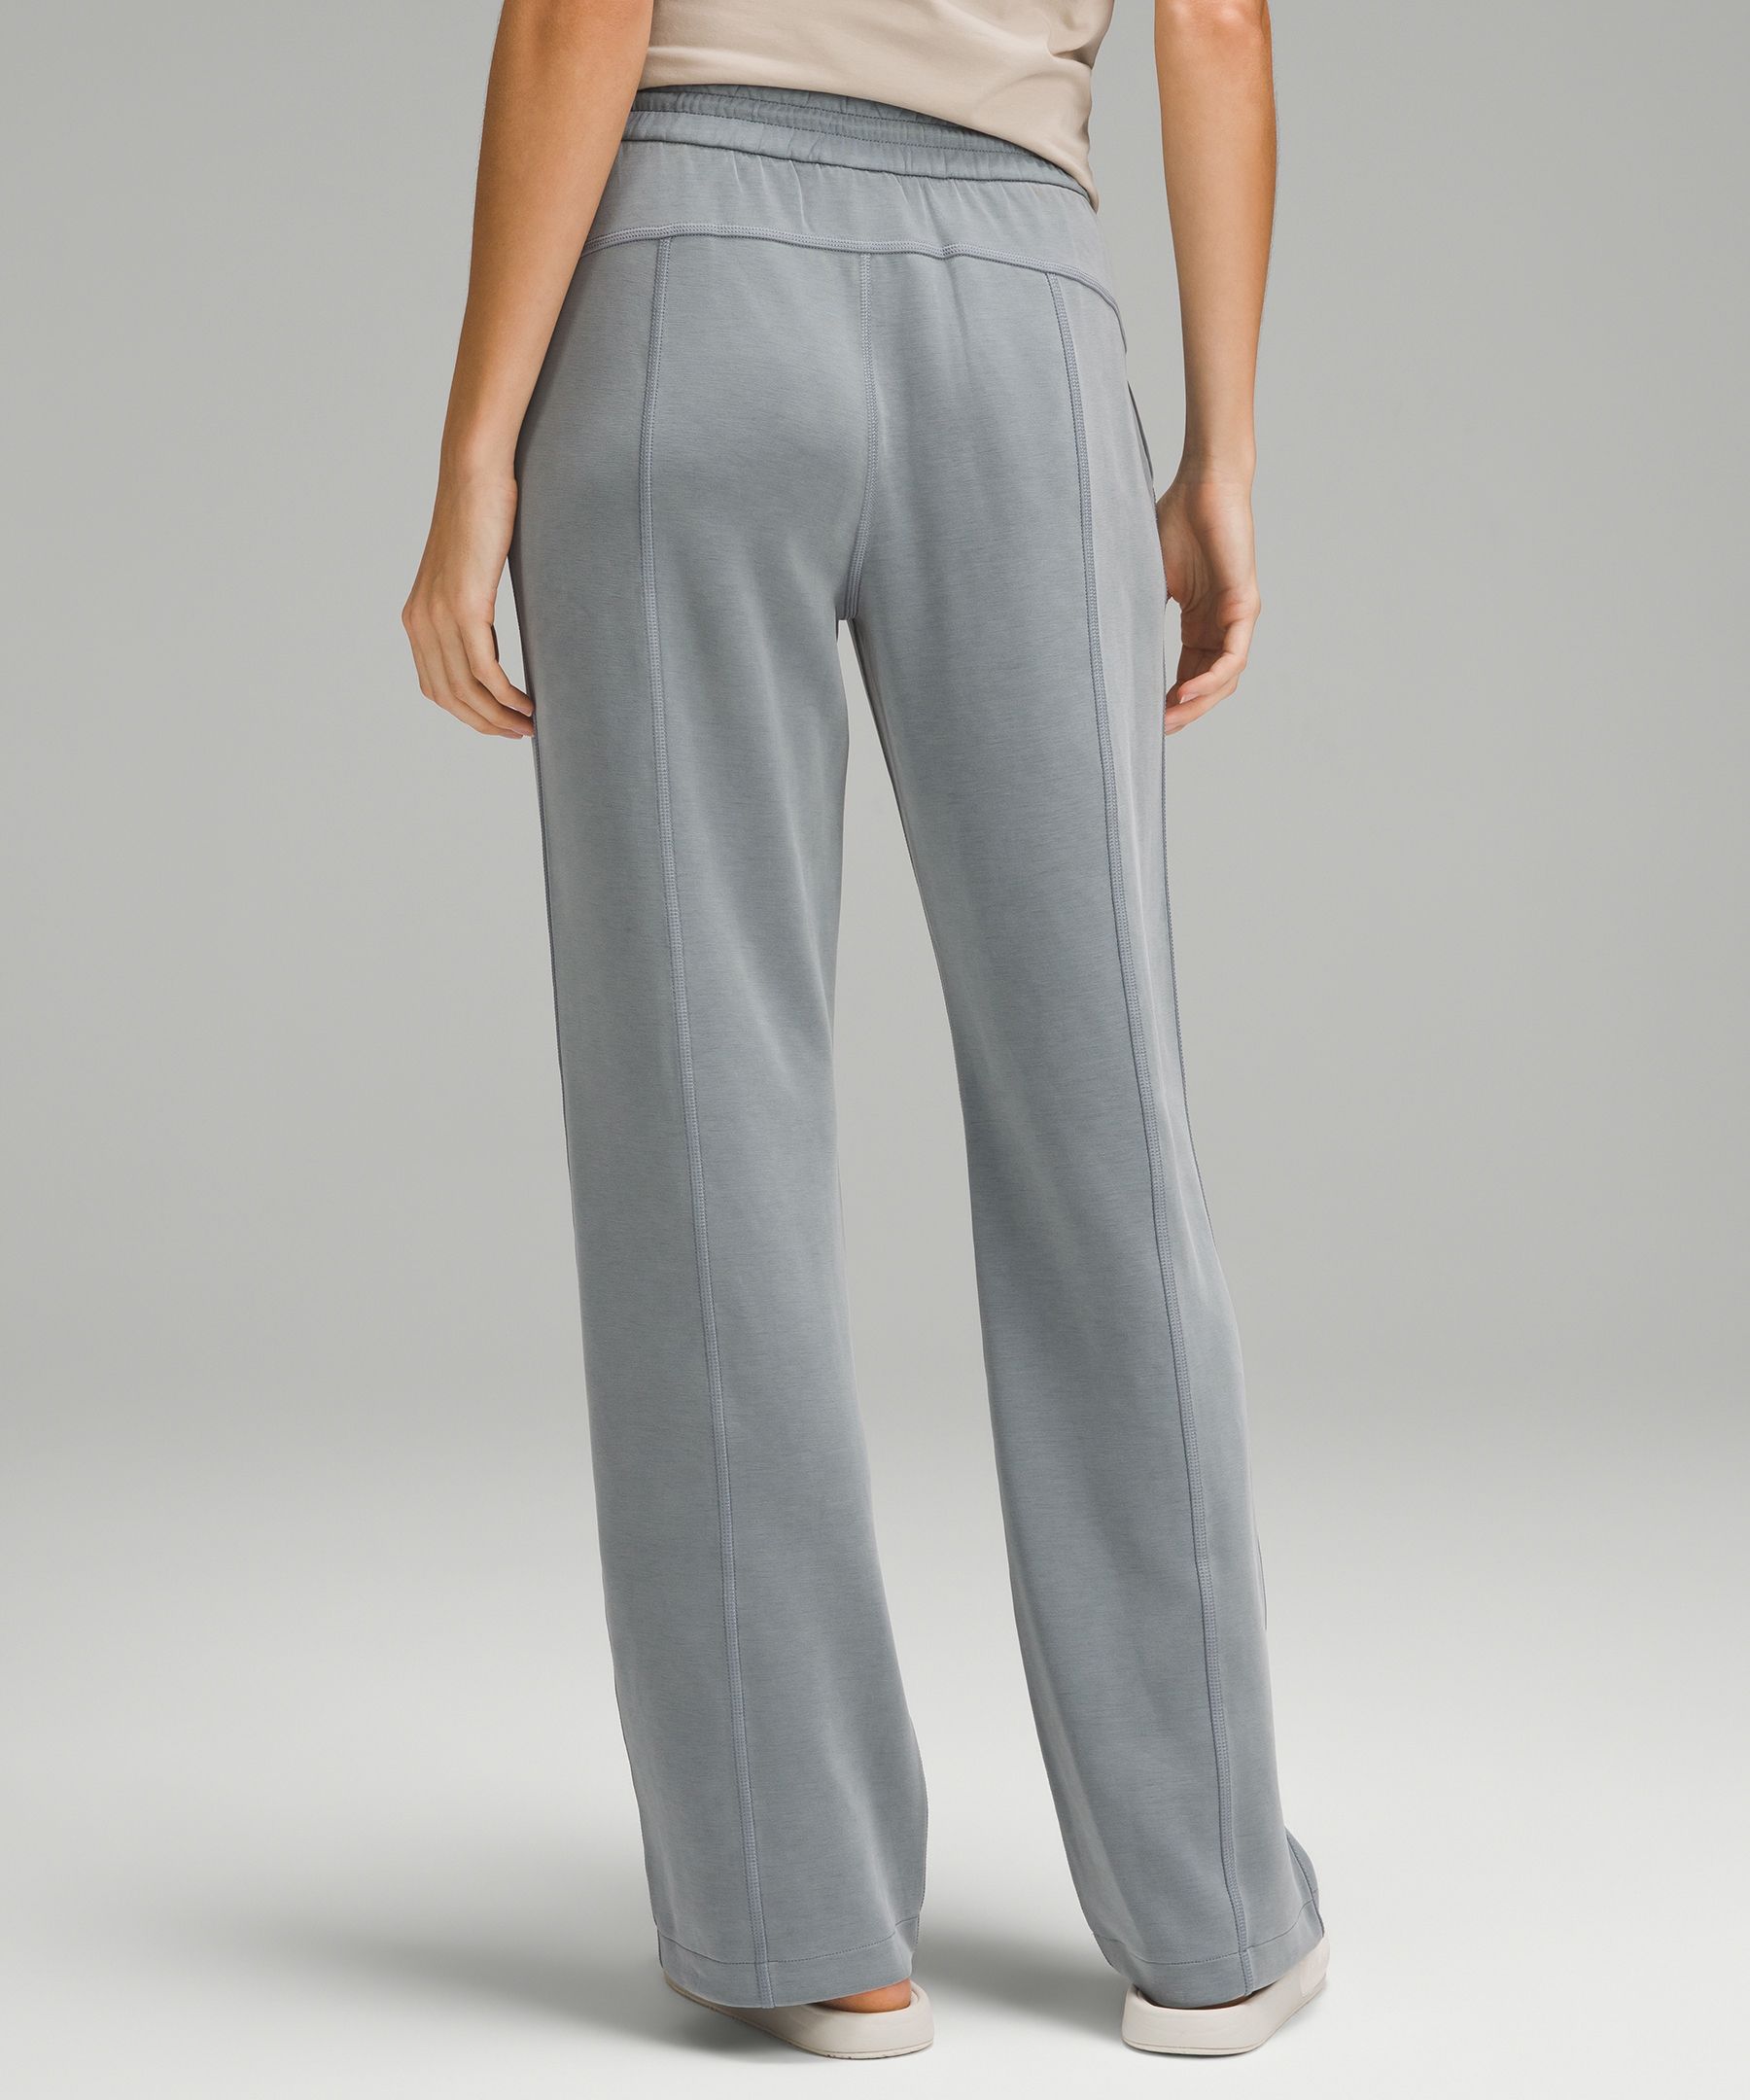 Lululemon Softstreme High-Rise Pant Review 2023